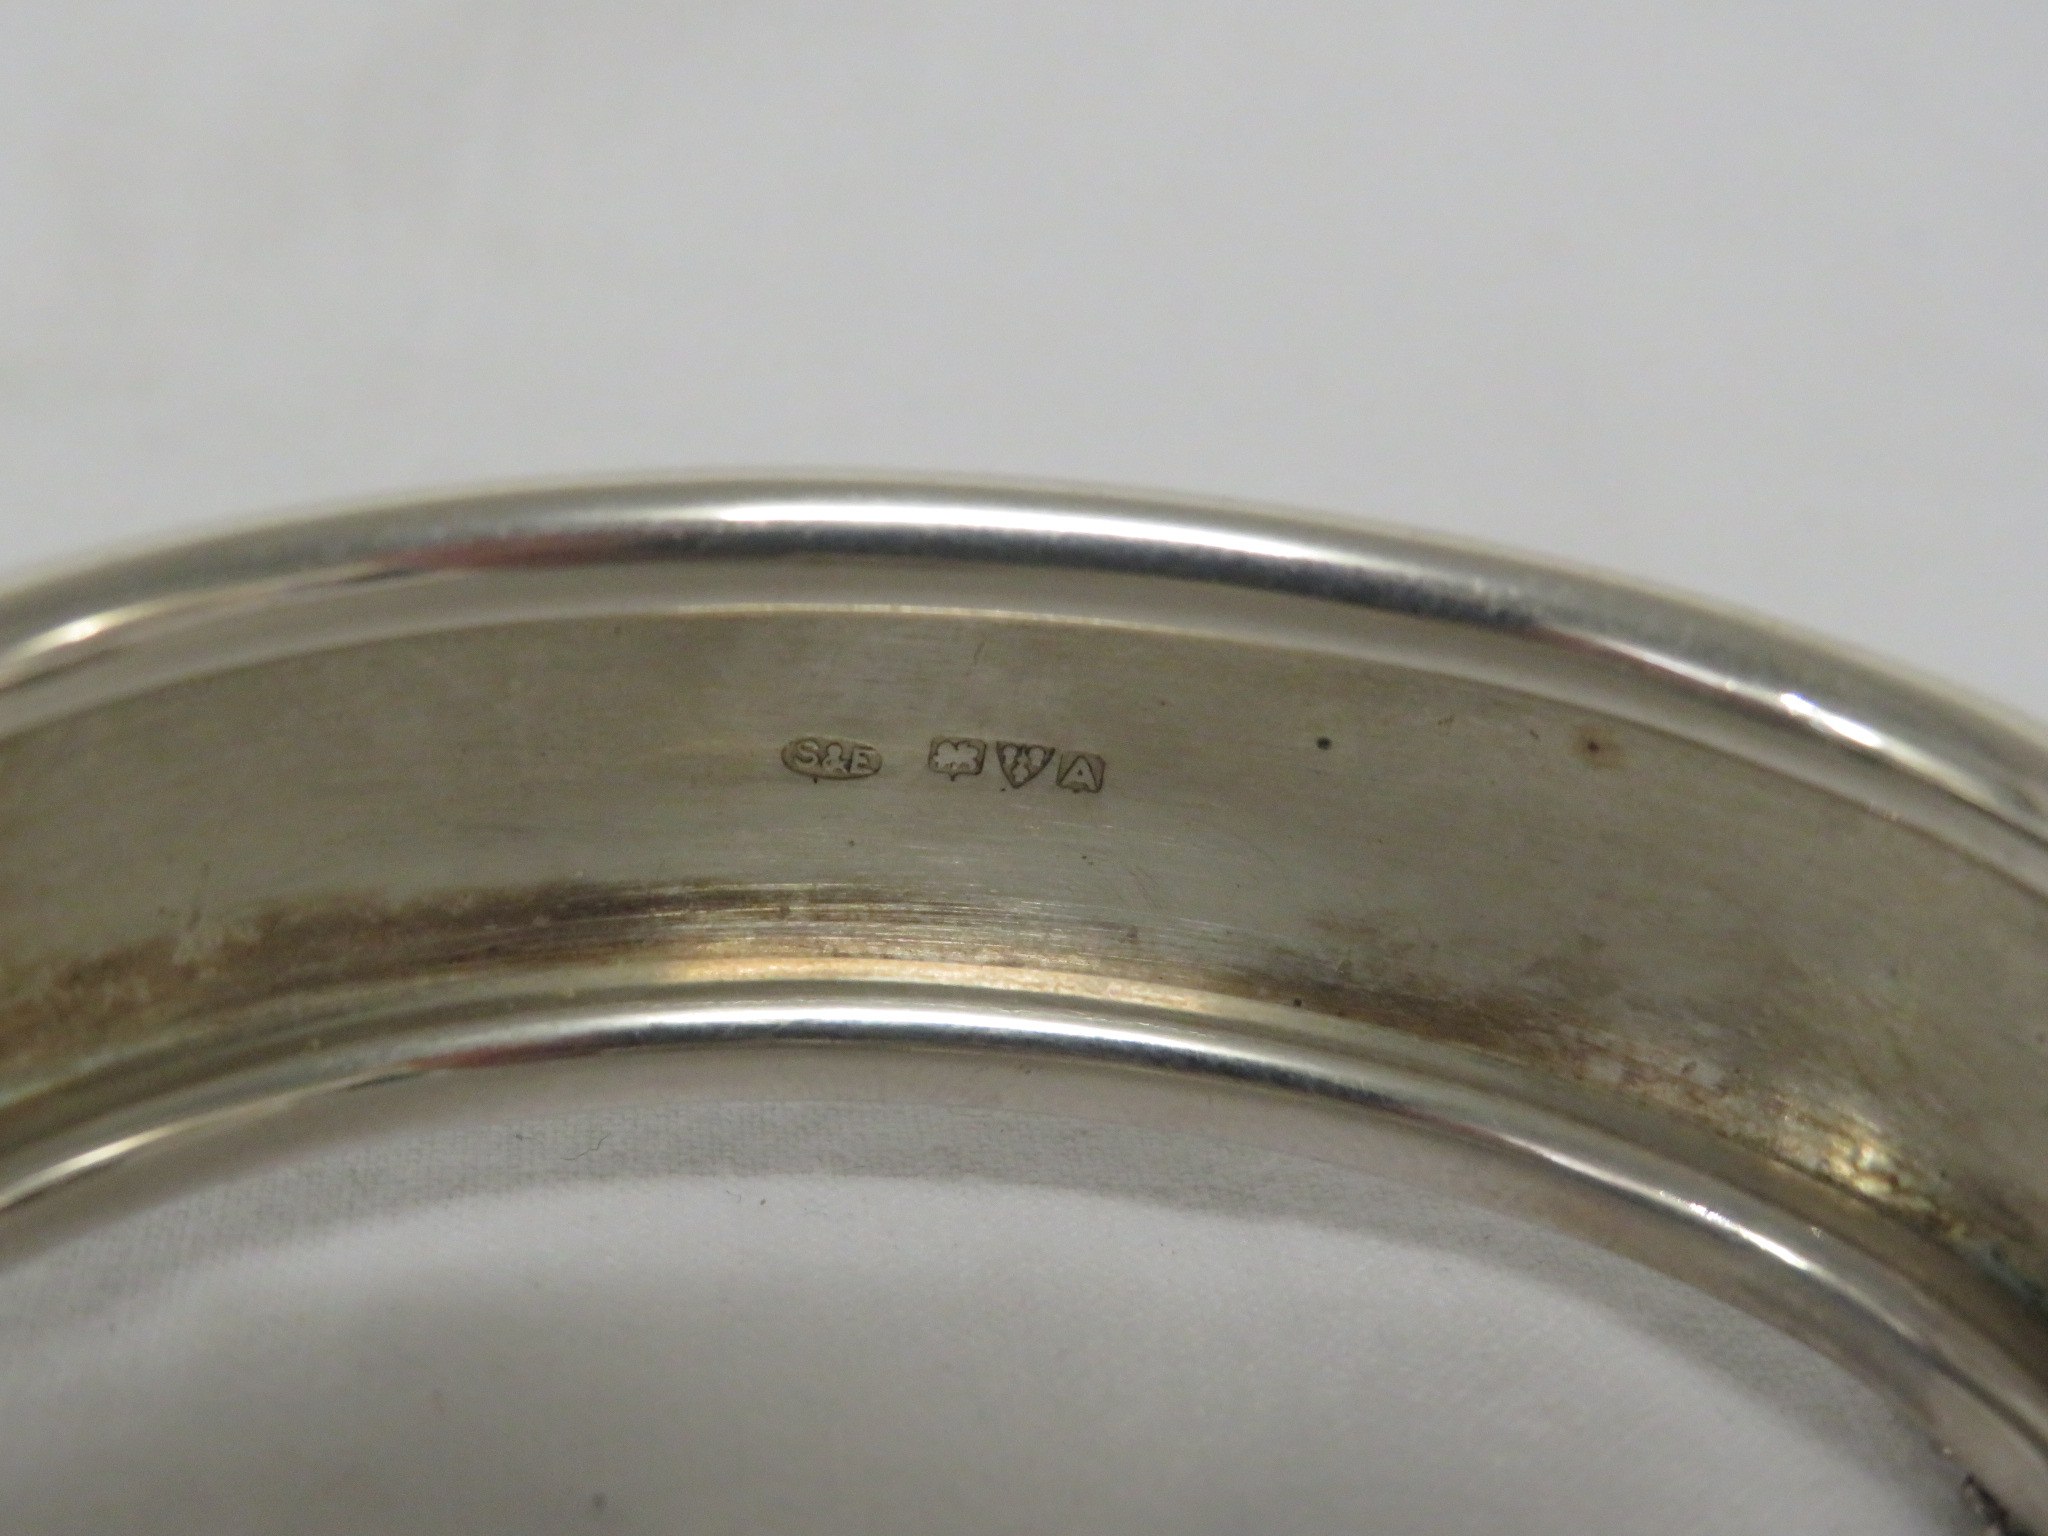 A SMITH EWEN & STYLIC LTD HALF-FOLIATE ENGRAVED SILVER BANGLE WITH SAFETY CHAIN, MARKS FOR - Image 4 of 4